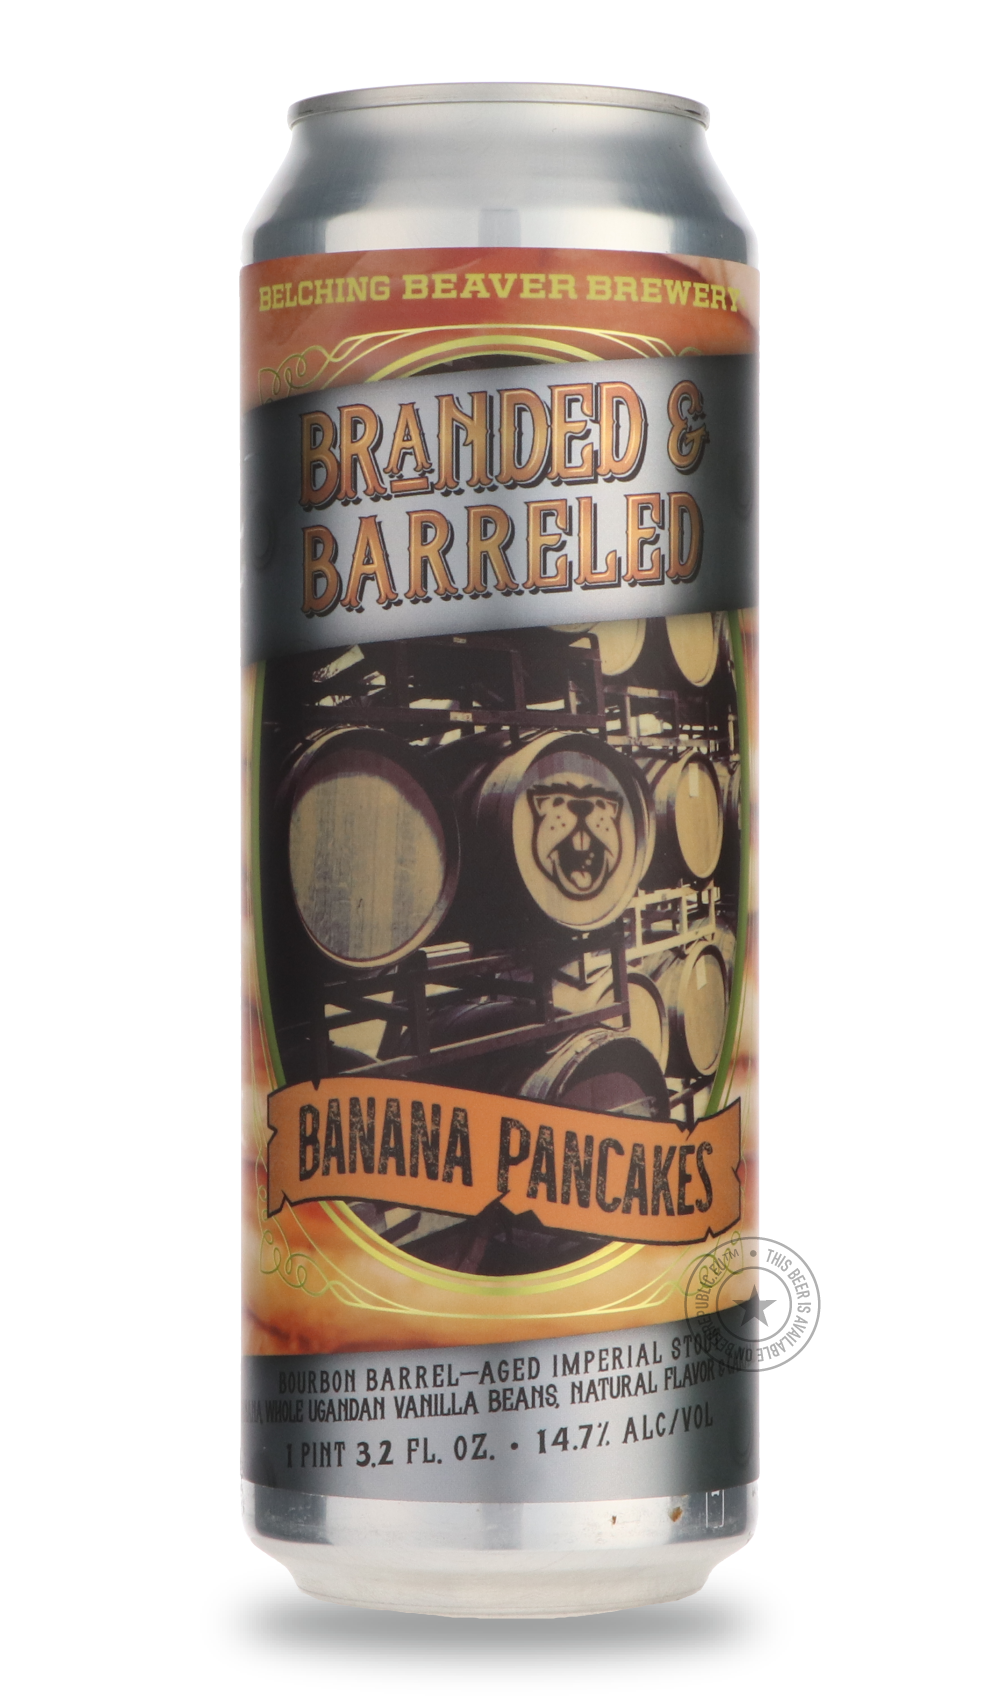 -Belching Beaver- Branded & Barreled - Banana Pancakes-Stout & Porter- Only @ Beer Republic - The best online beer store for American & Canadian craft beer - Buy beer online from the USA and Canada - Bier online kopen - Amerikaans bier kopen - Craft beer store - Craft beer kopen - Amerikanisch bier kaufen - Bier online kaufen - Acheter biere online - IPA - Stout - Porter - New England IPA - Hazy IPA - Imperial Stout - Barrel Aged - Barrel Aged Imperial Stout - Brown - Dark beer - Blond - Blonde - Pilsner - 